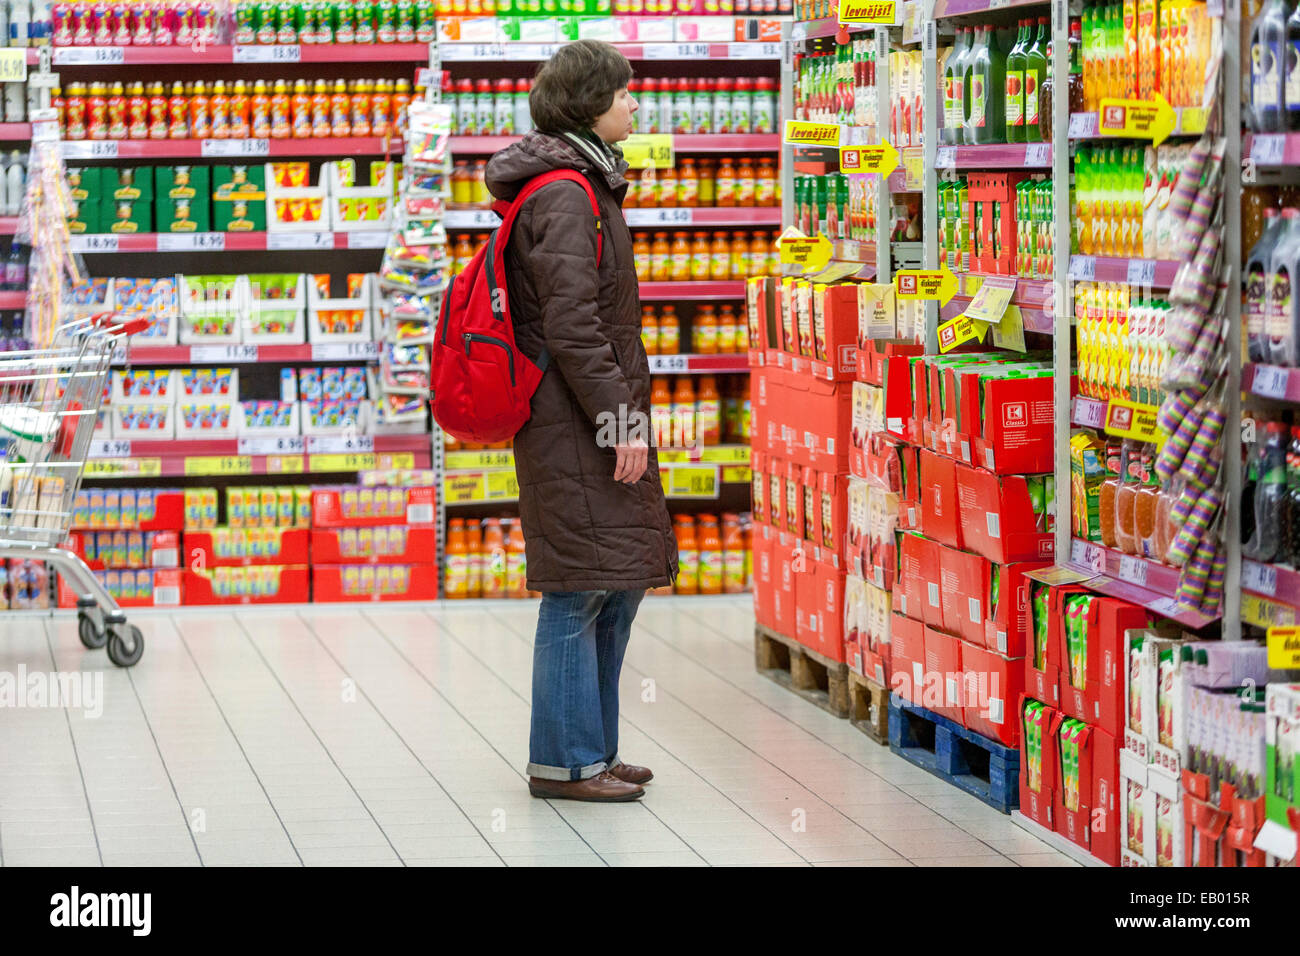 People, woman selects goods among the shelves, shopping in the supermarket Stock Photo